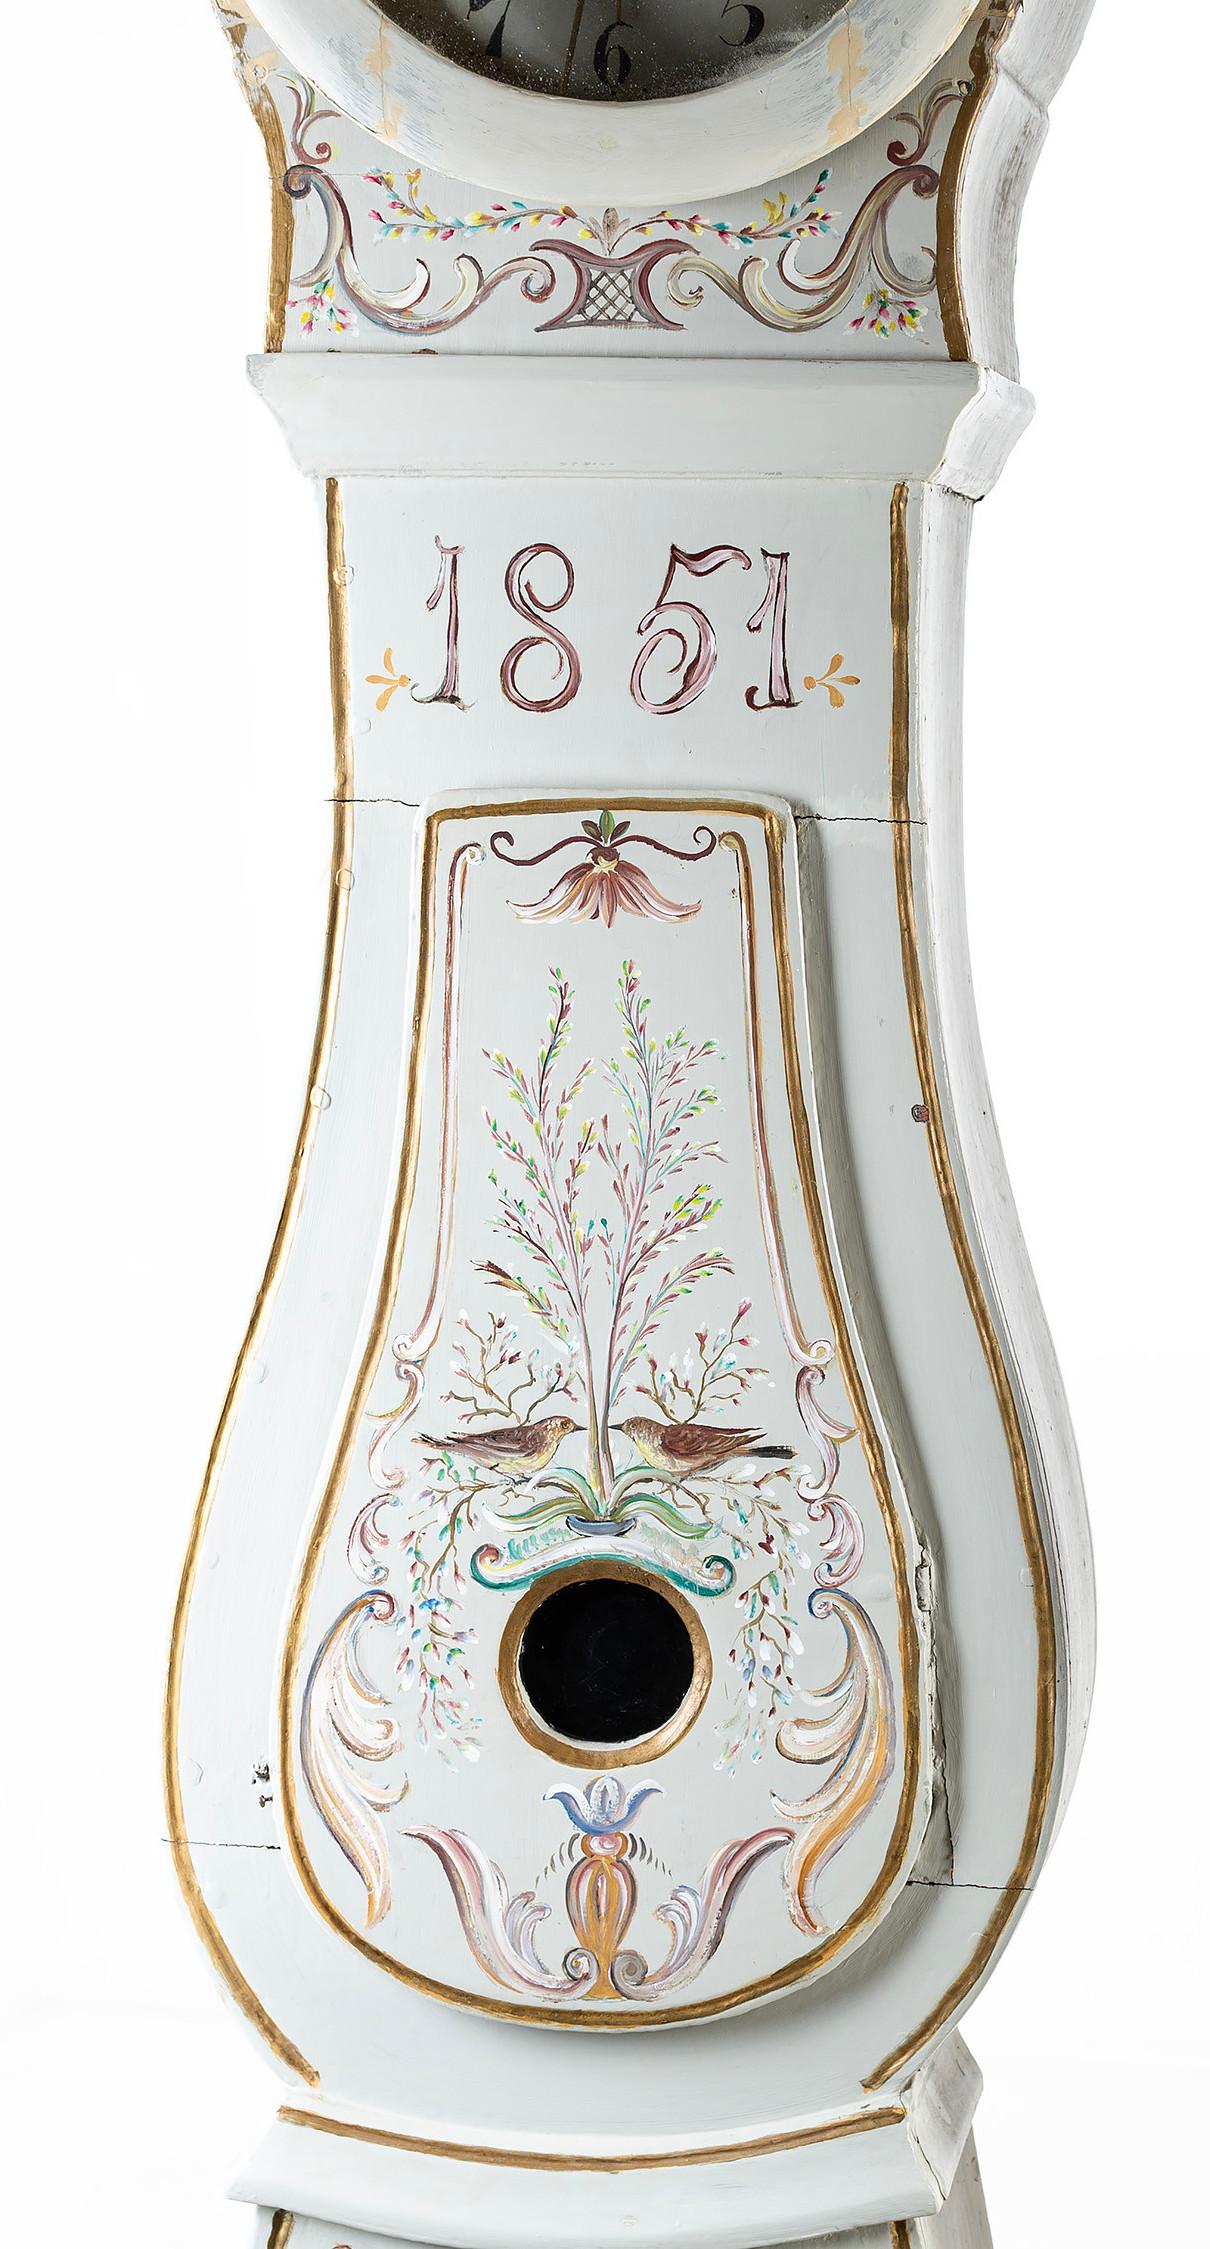 1851 Swedish Mora clock with hand painted floral details against a white painted background (original paintwork). Carved detailing of crown. Dial details include the name of the clockmaker: Anders Matsson and village Mora. Working Longcase clock